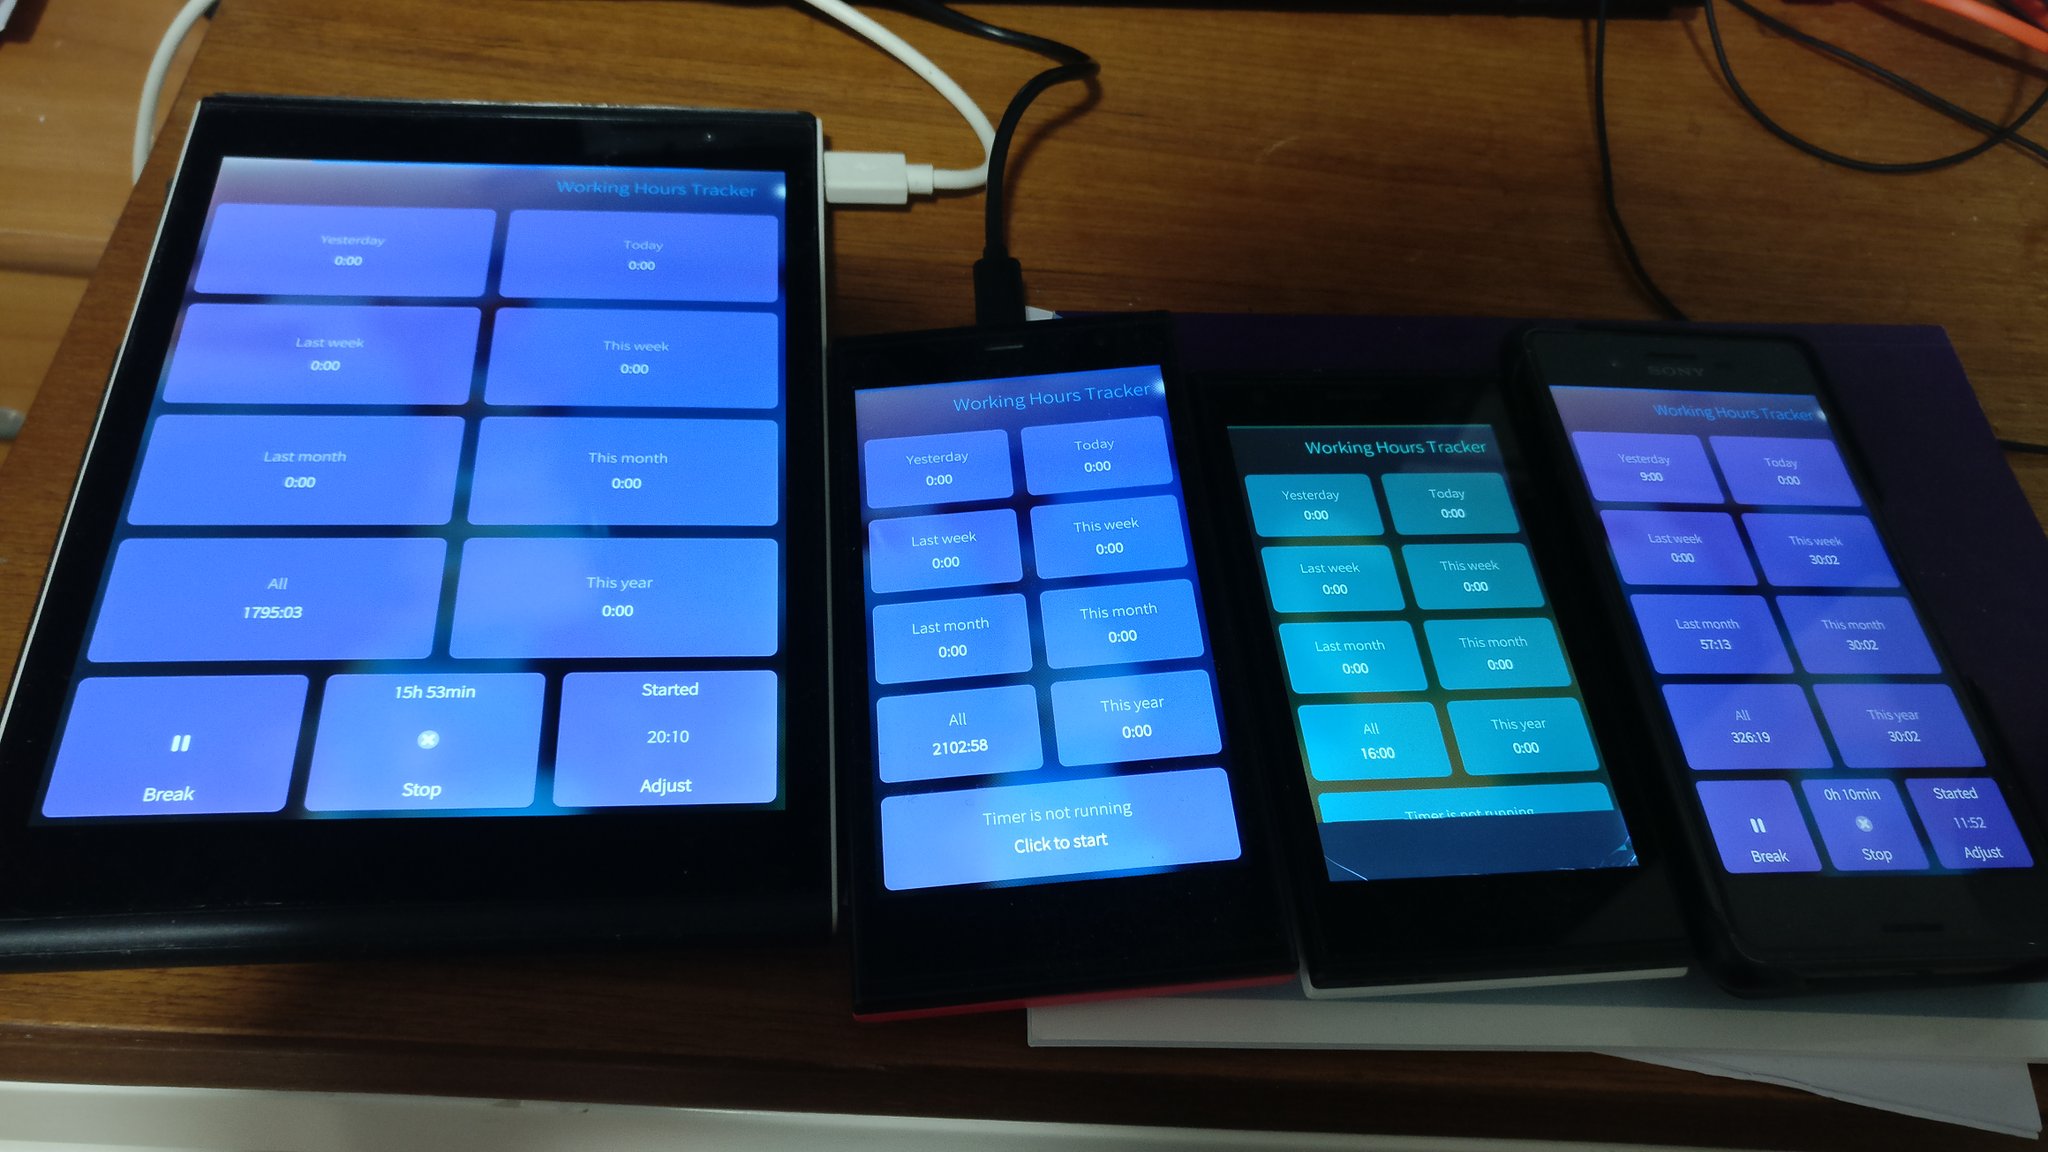 Working Hours Tracker running on multiple SailfishOS devices.